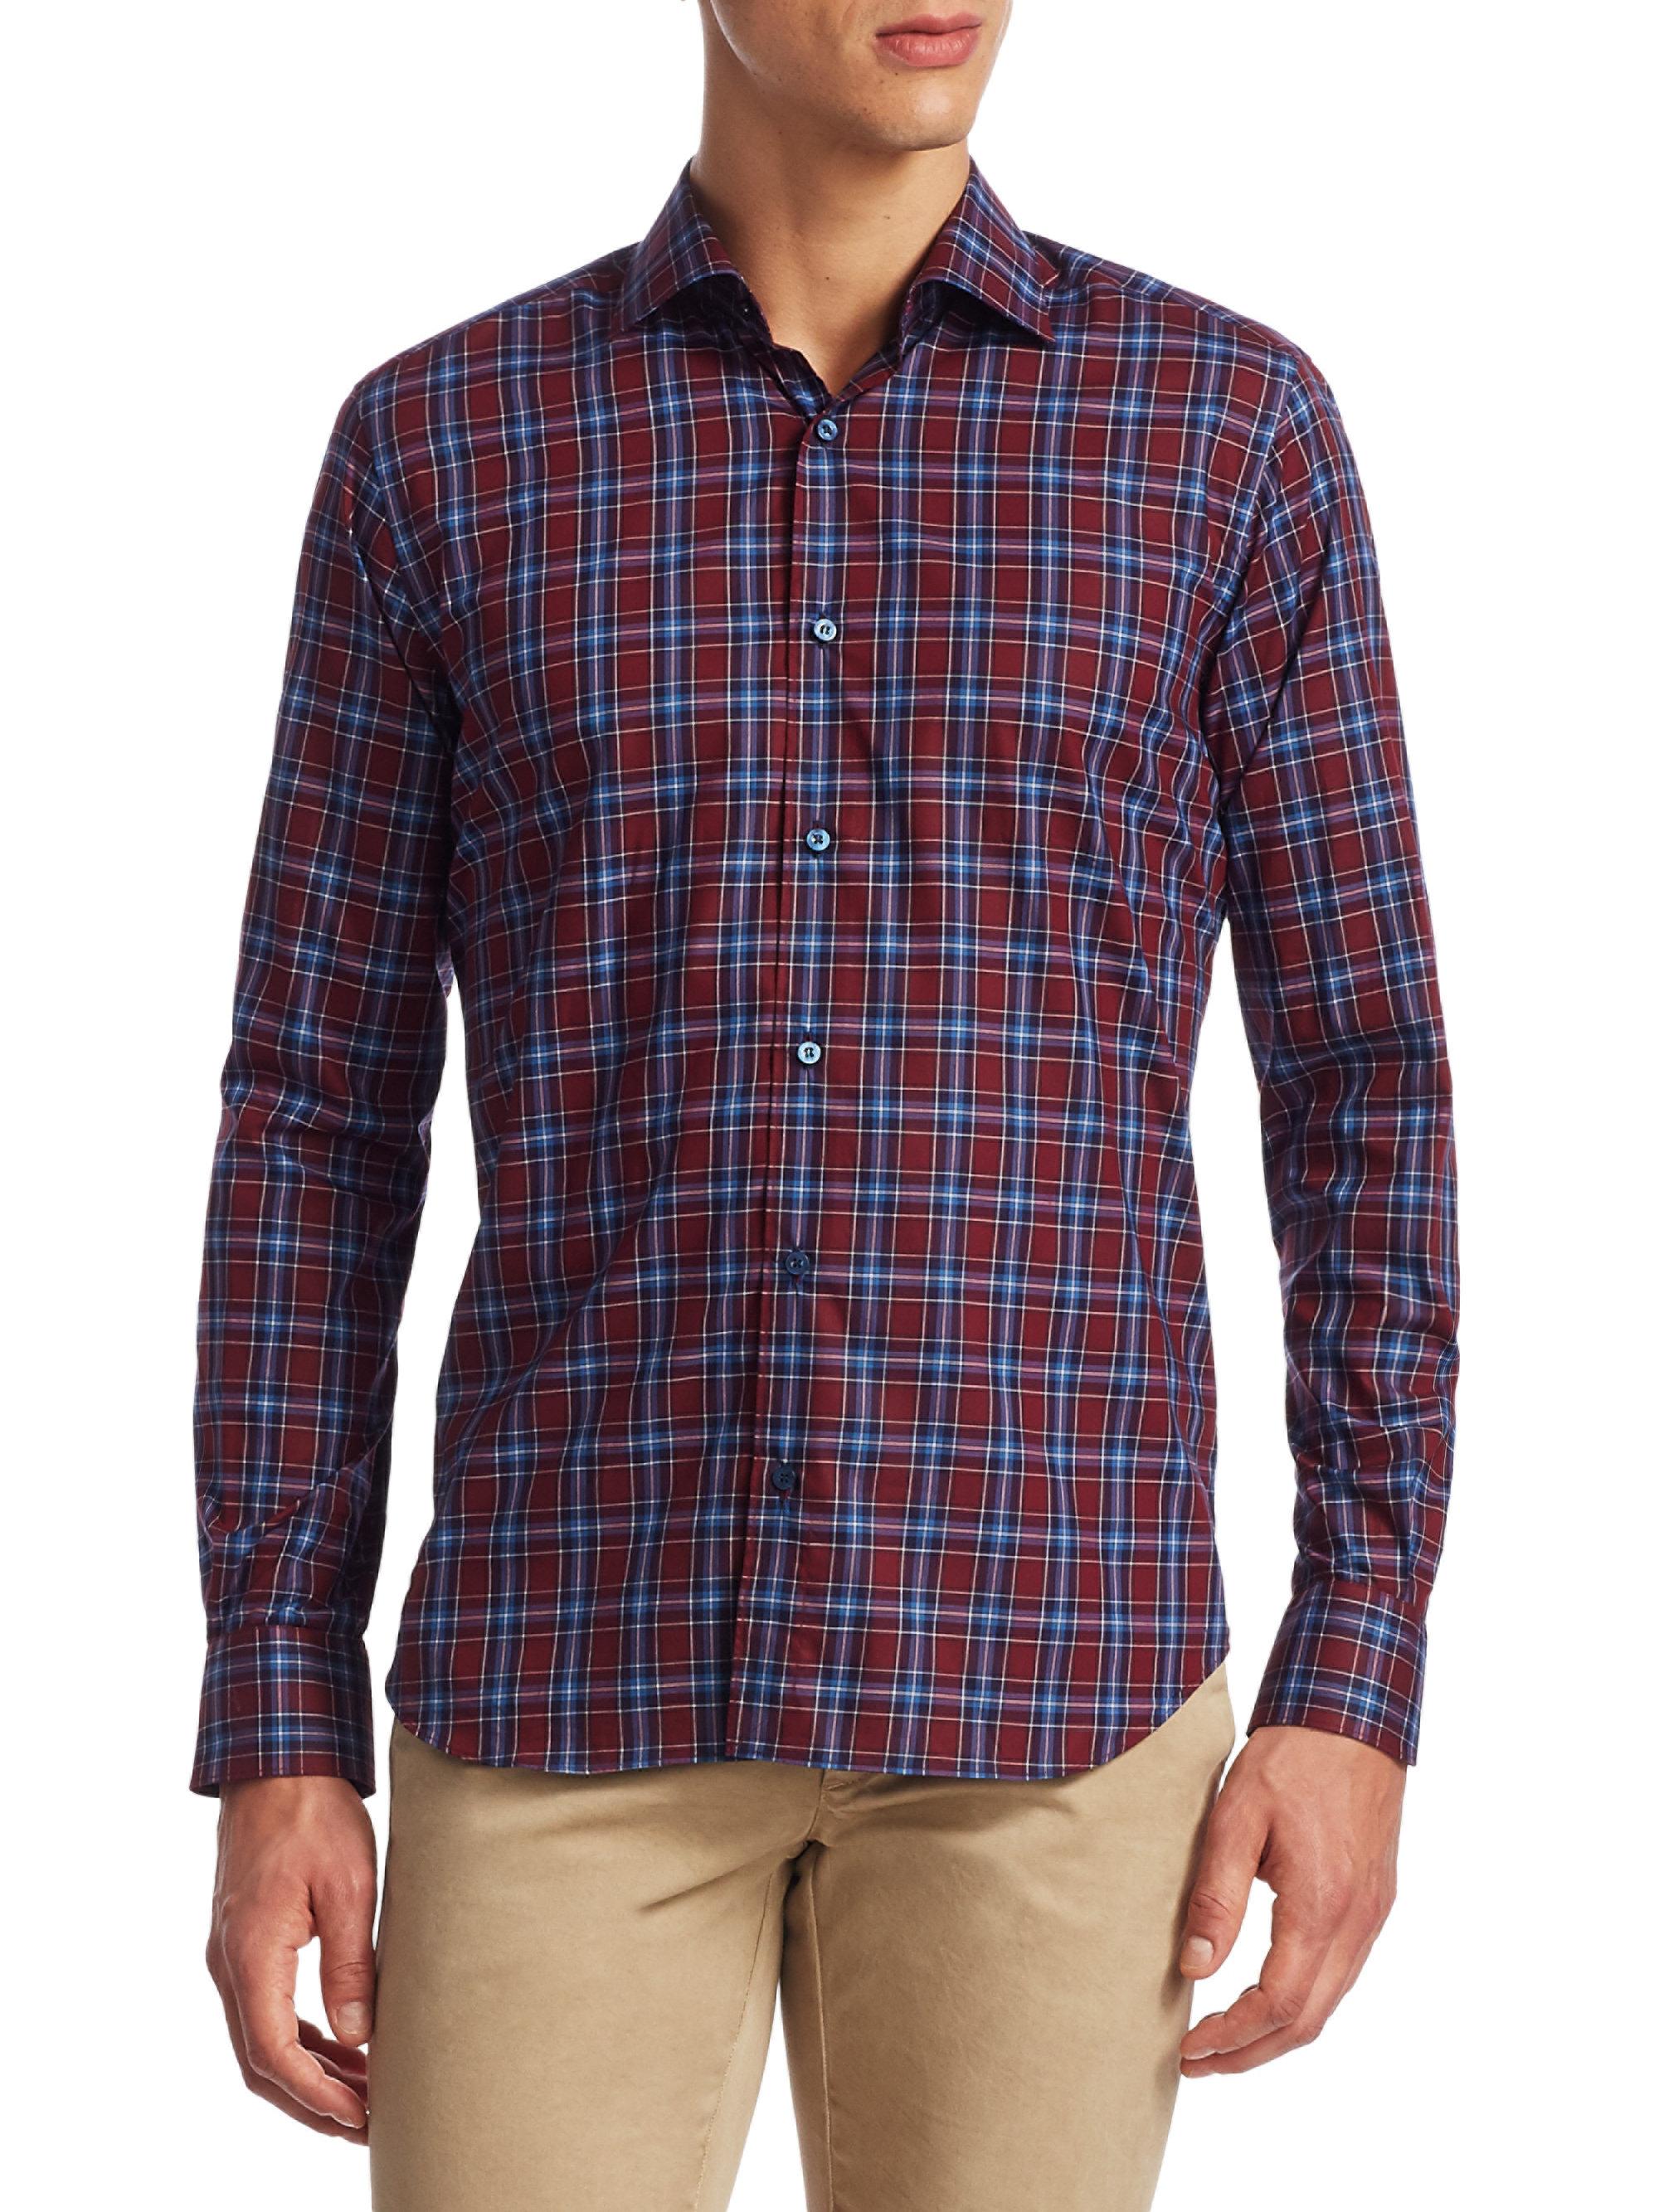 Lyst - Saks Fifth Avenue Collection Plaid Cotton Button-down Shirt in ...